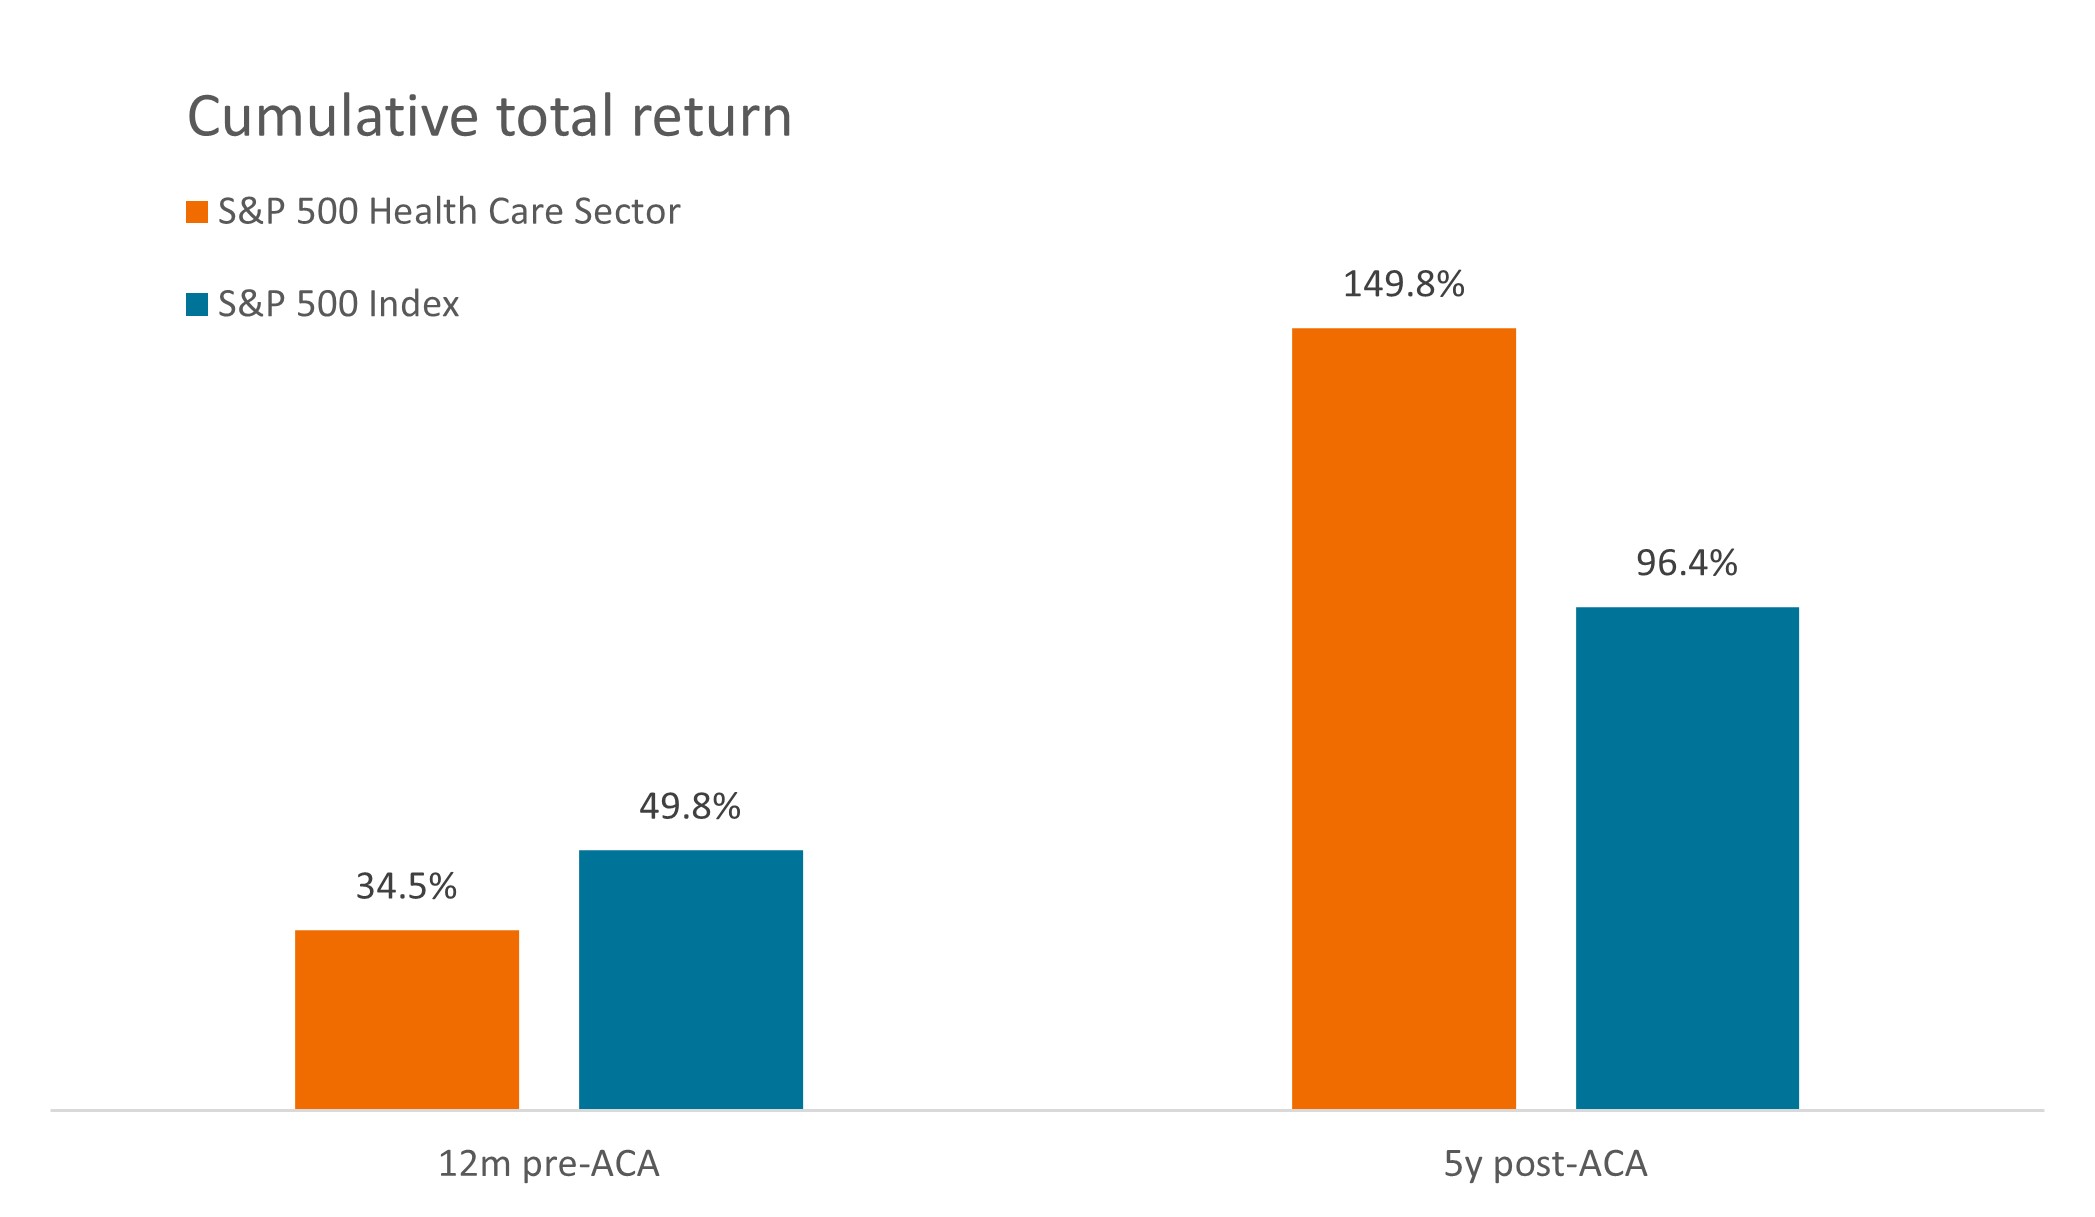 Source: Bloomberg. Pre-ACA period is 31 March 2009 to 31 March 2010. Post-ACA period is 31 March 2010 to 31 March 2015. The Affordable Care Act was signed into law on 23 March 2010. The S&P 500 Health Care Sector comprises those companies included in the S&P 500 that are classified as members of the GICS